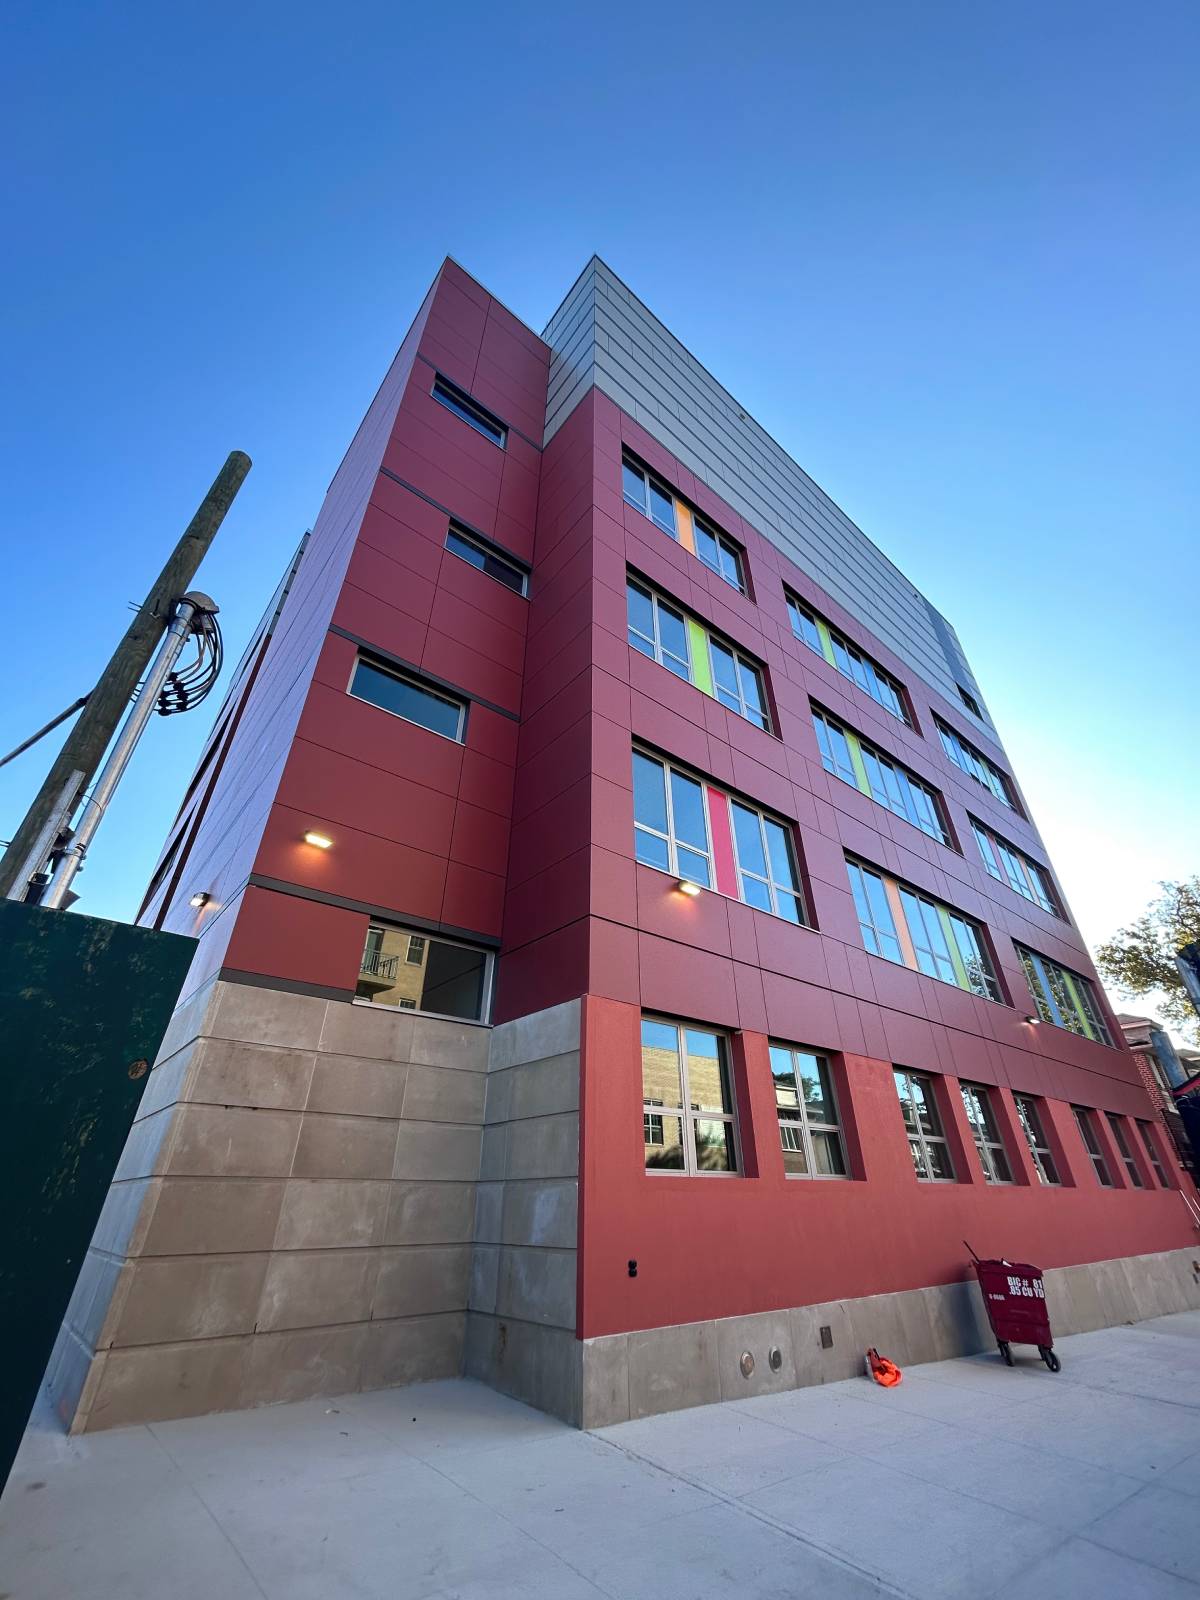 NYC PS730 Receives Temporary Certificate of Occupancy